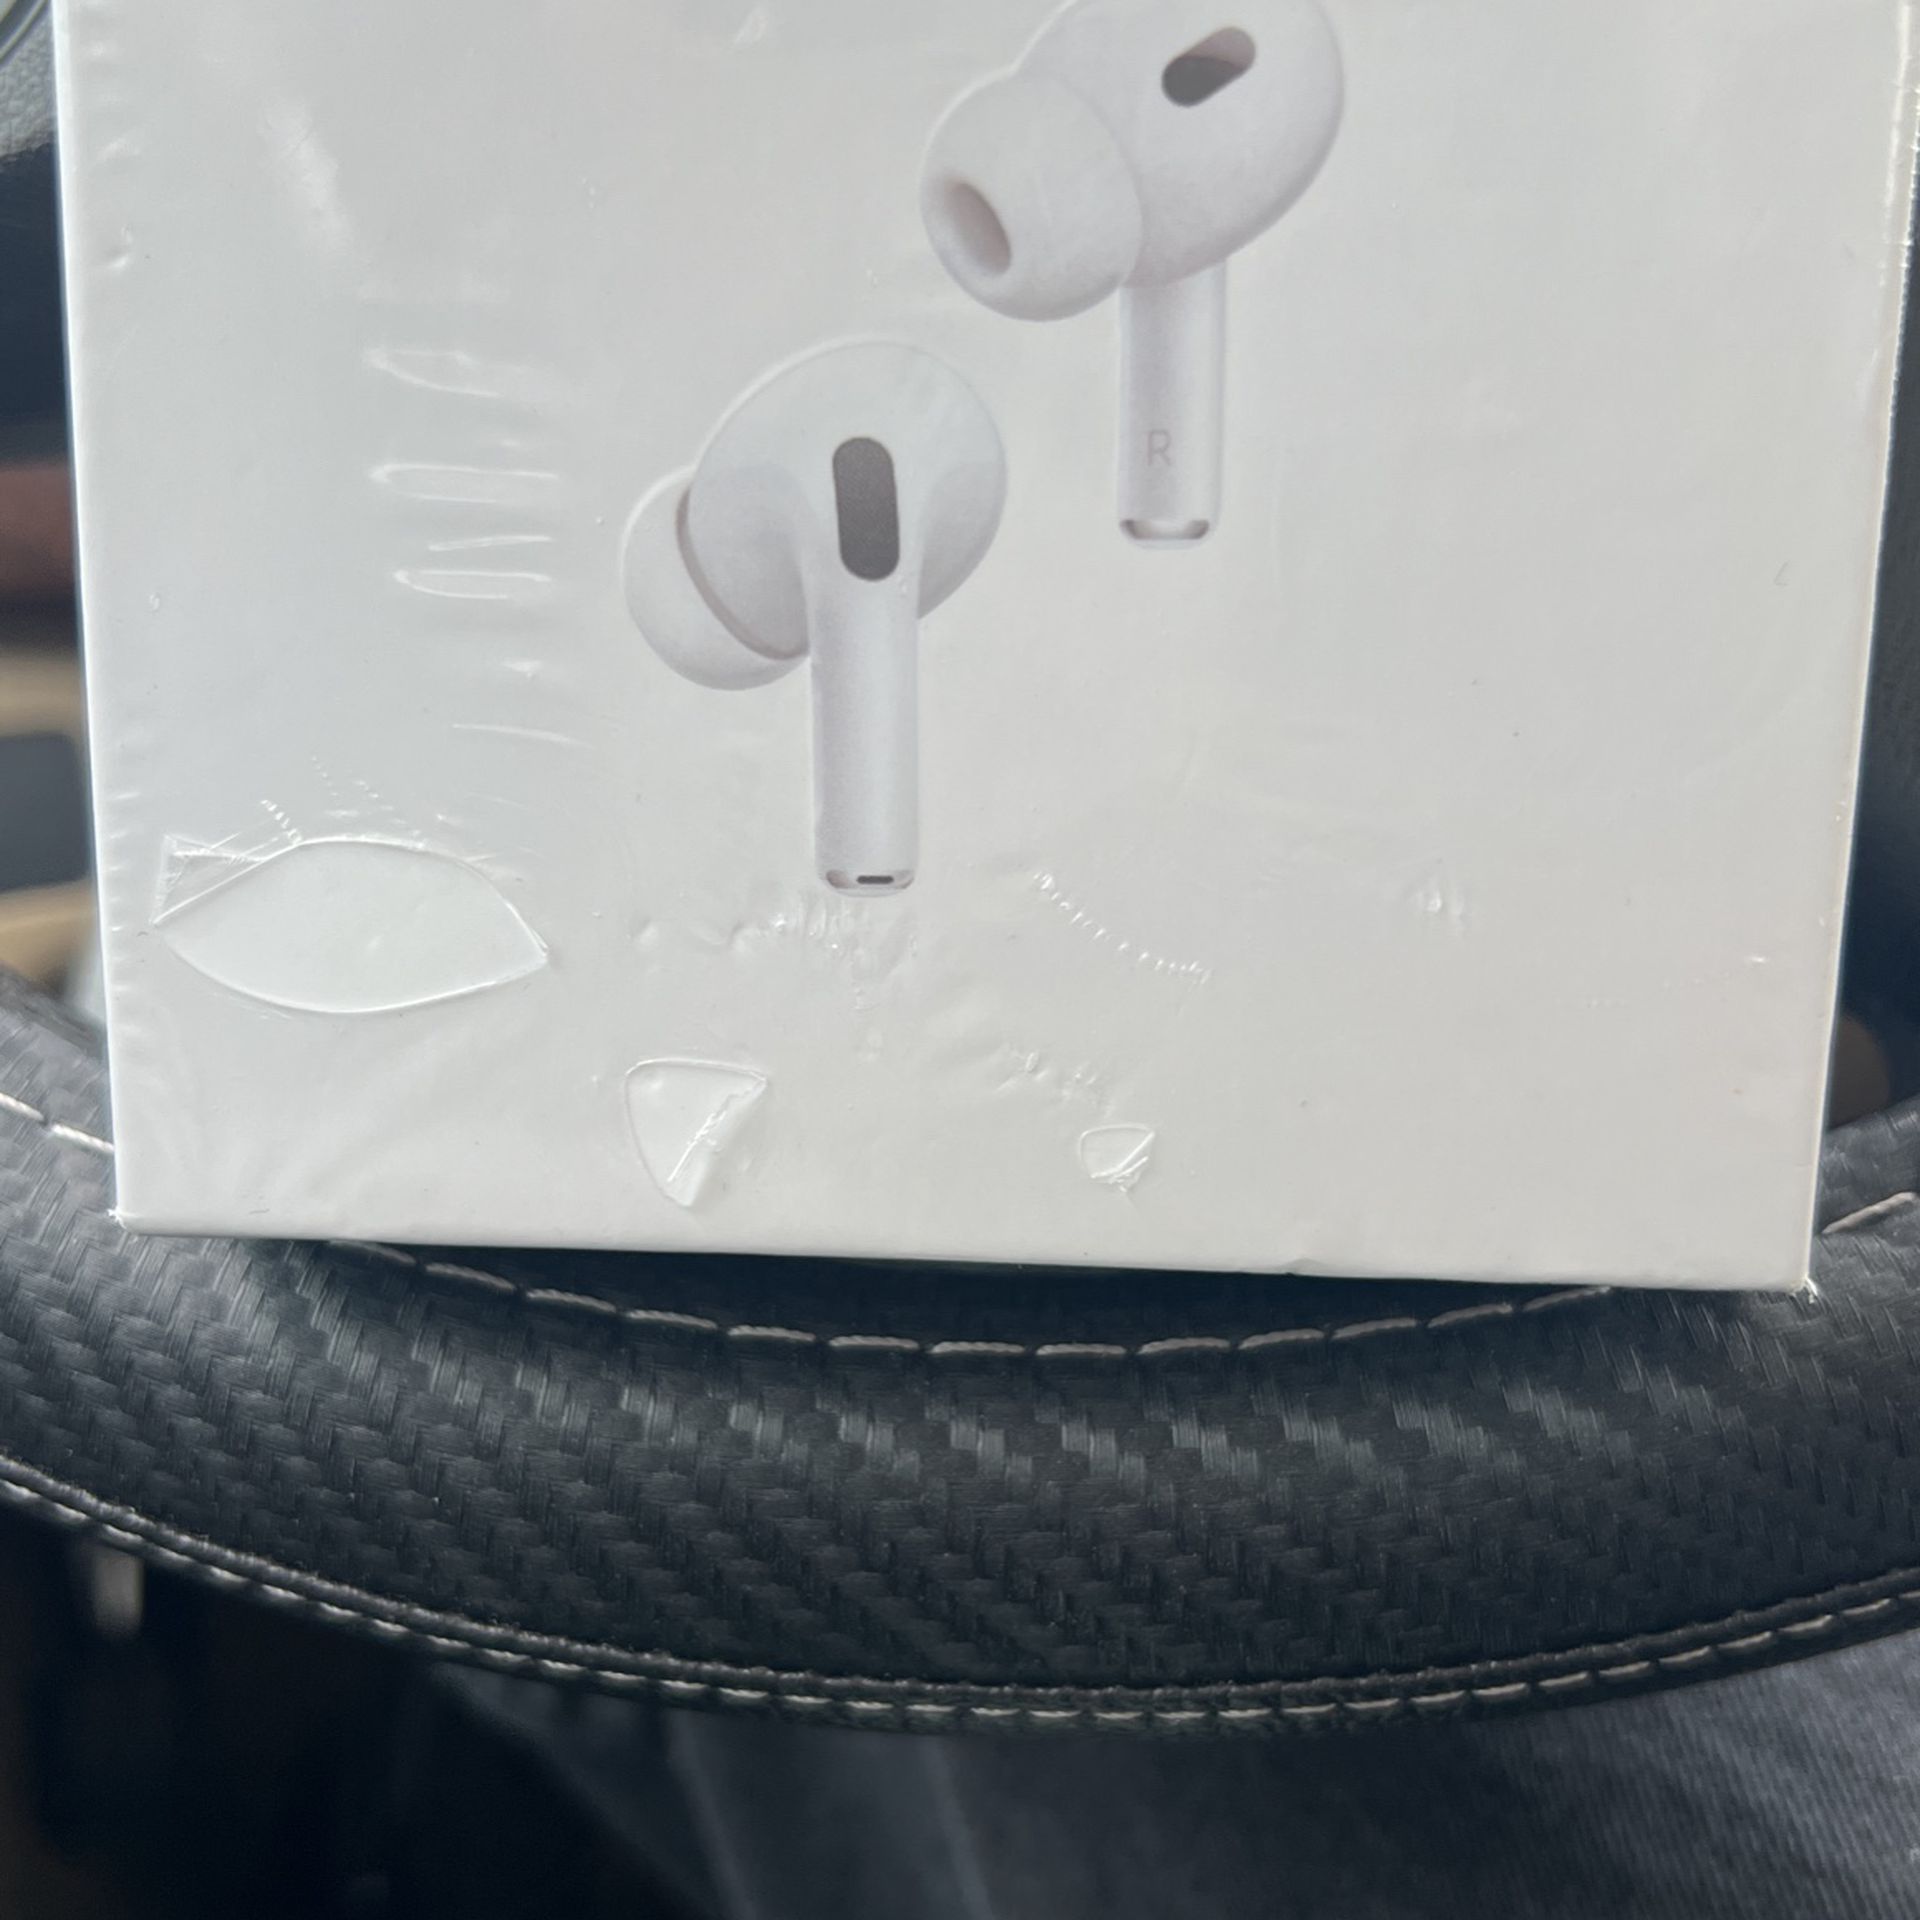 2nd Gen AirPods Pro With Mag Safe Case